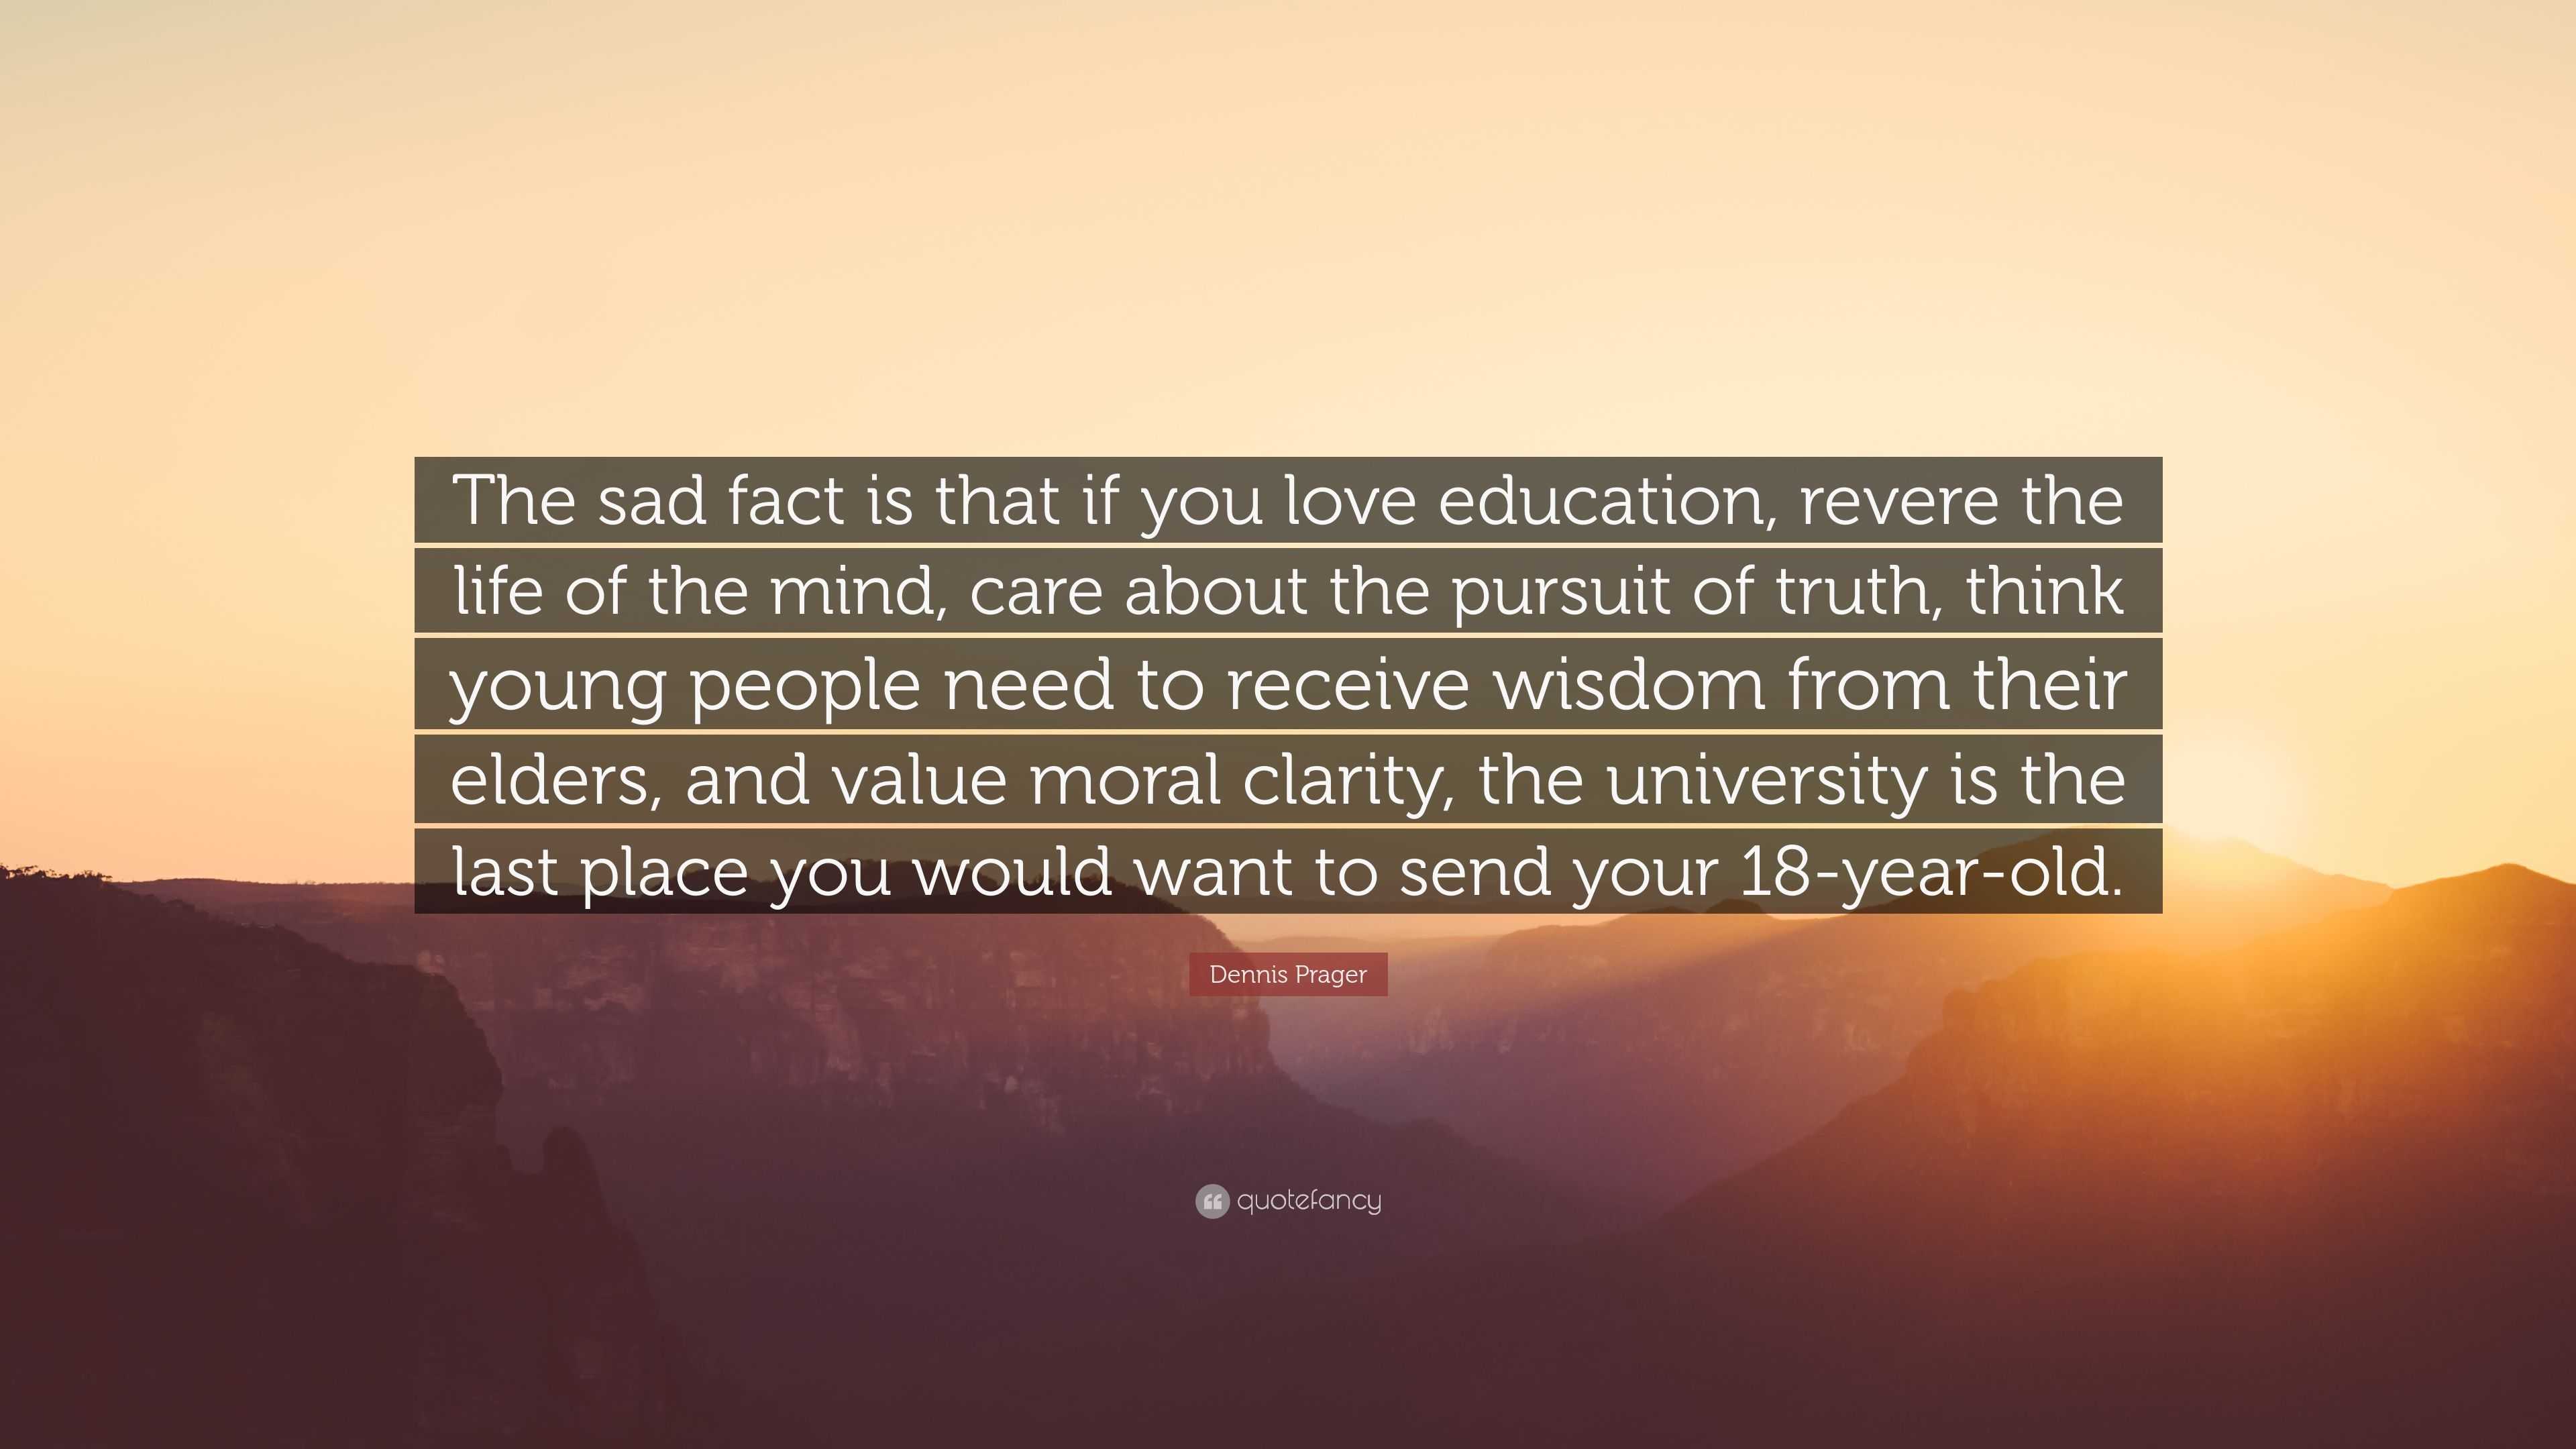 Dennis Prager Quote “The sad fact is that if you love education revere